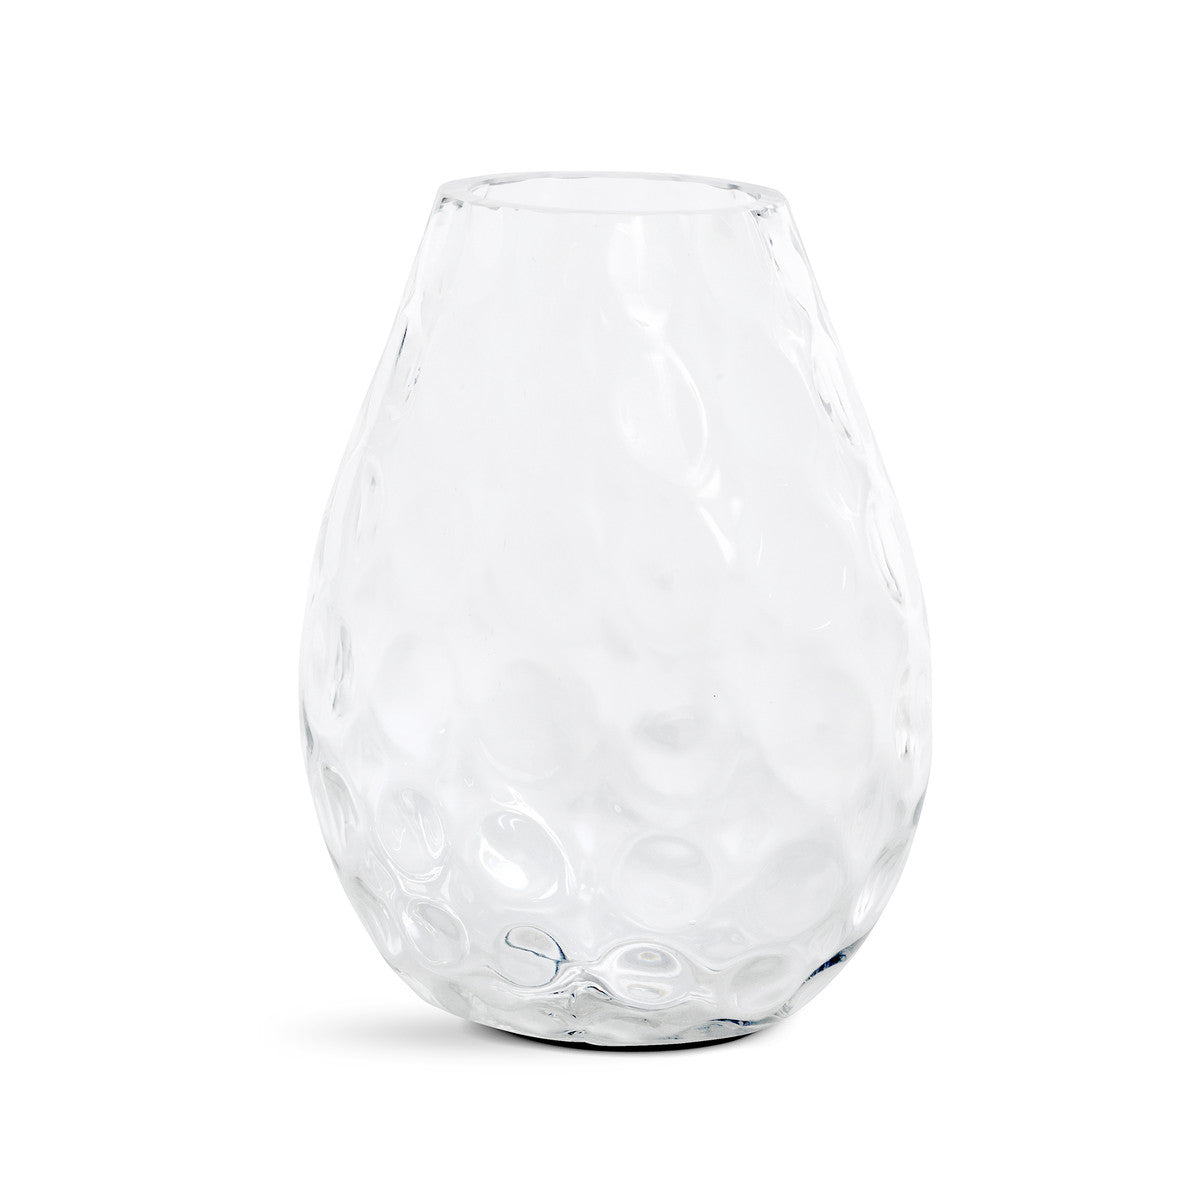 Alouetta Blown Glass Vase Collection - Colonial House of Flowers | Atlanta